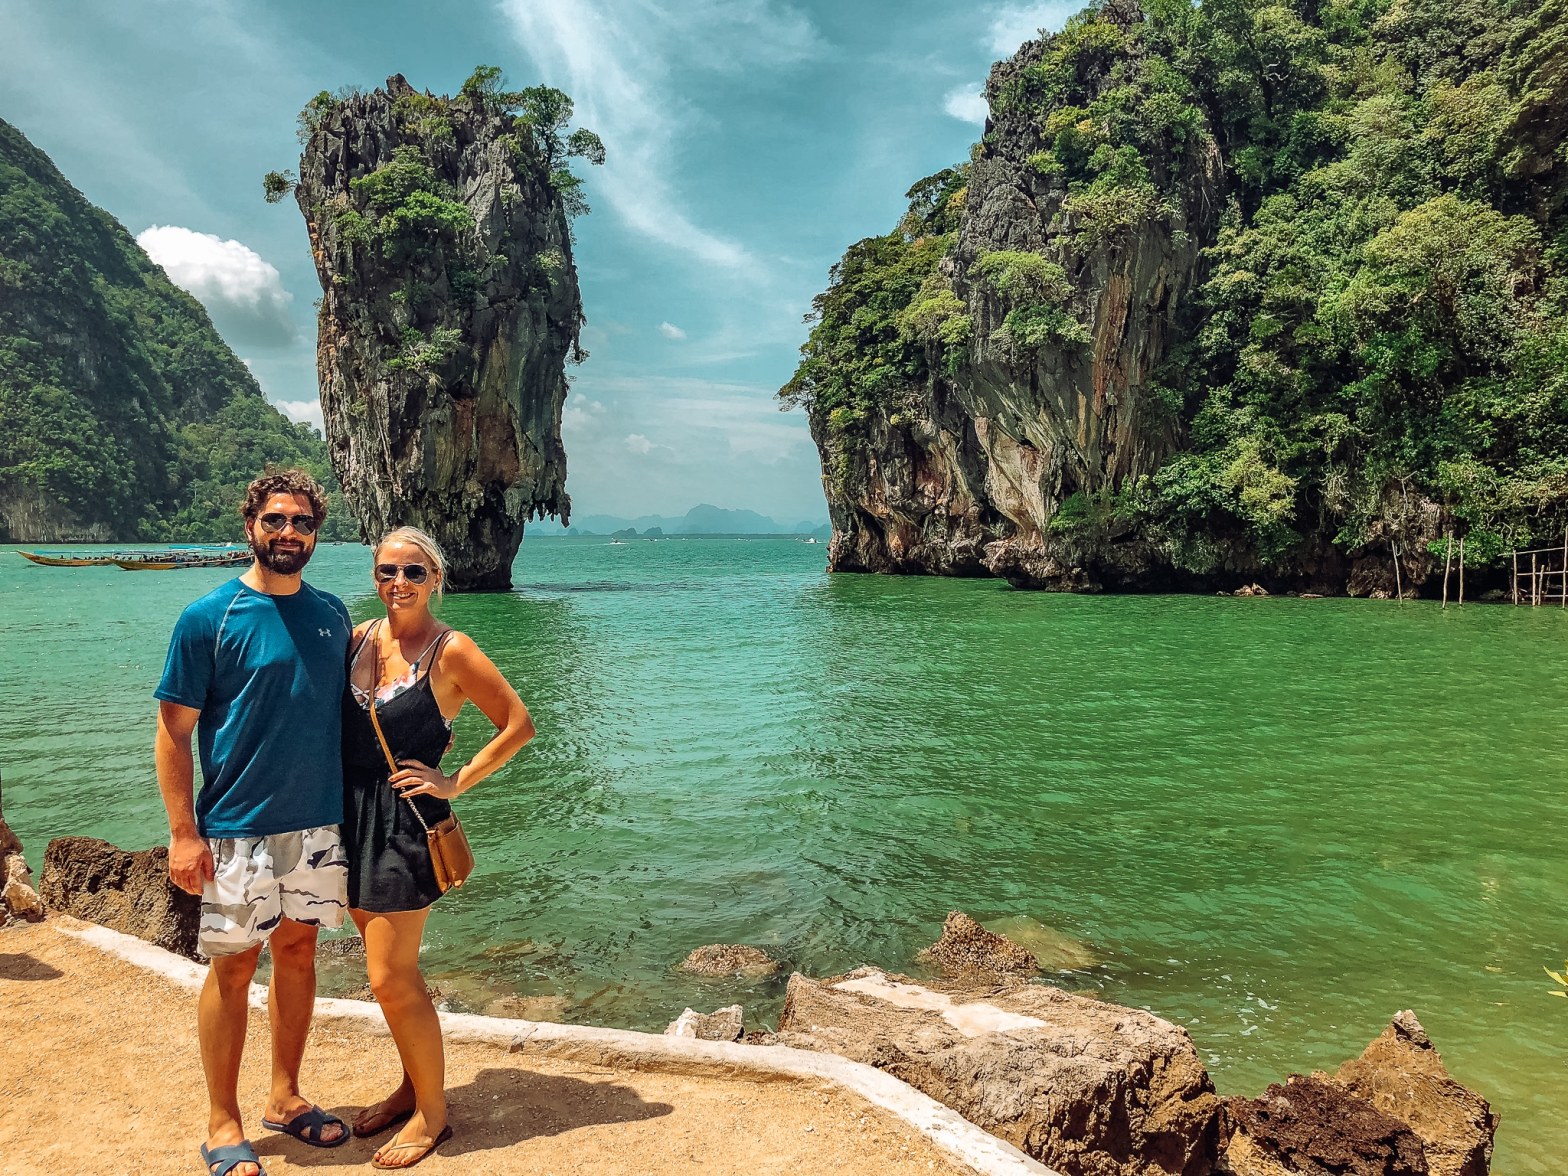 Smiling man and woman standing in front of James Bond Island, a very small but tall island, sticking out of the water in Thailand